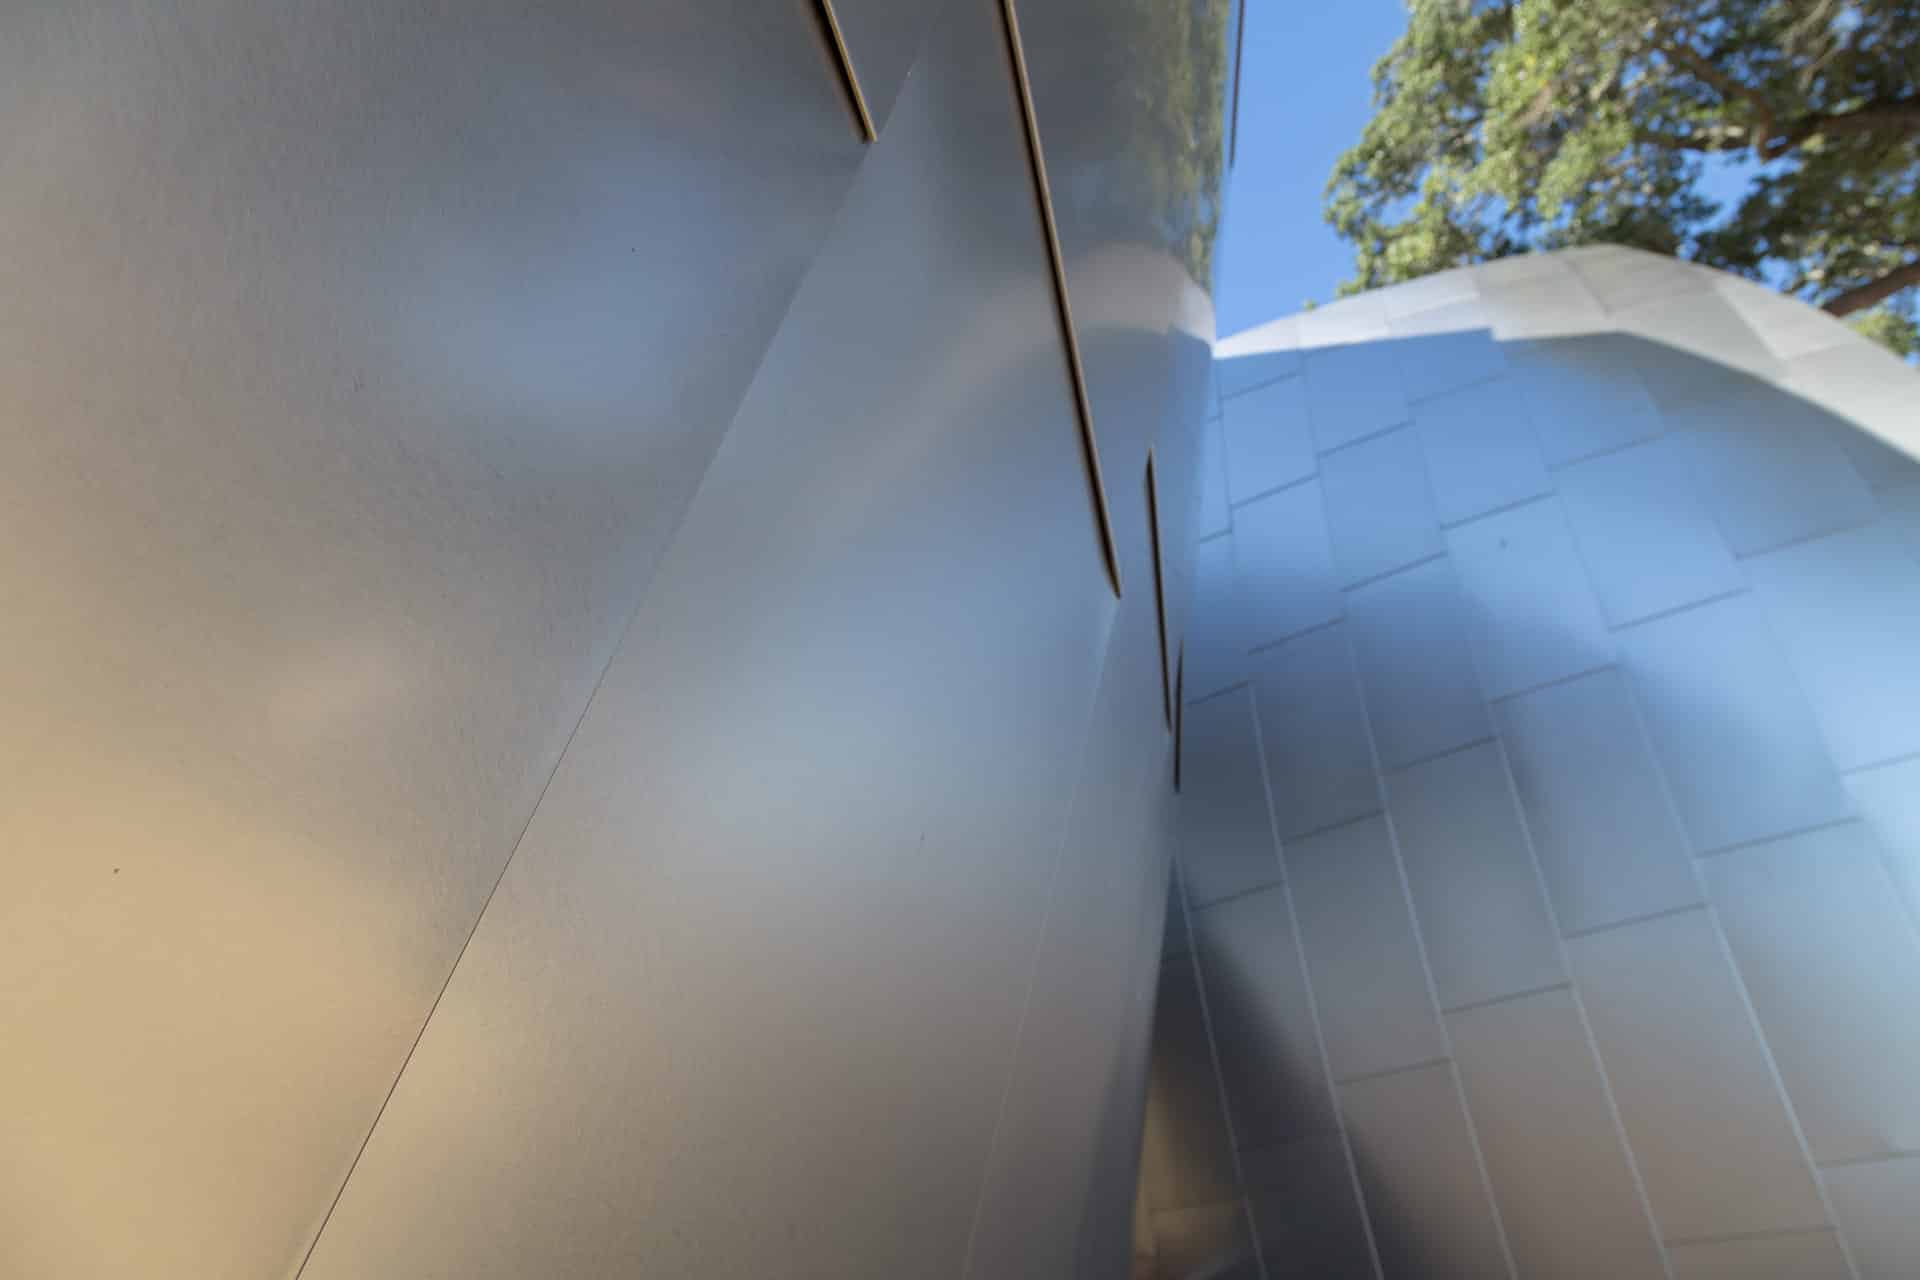 Ohr O'Keefe Museum Pods detail, designed by Frank Gehry Partners.